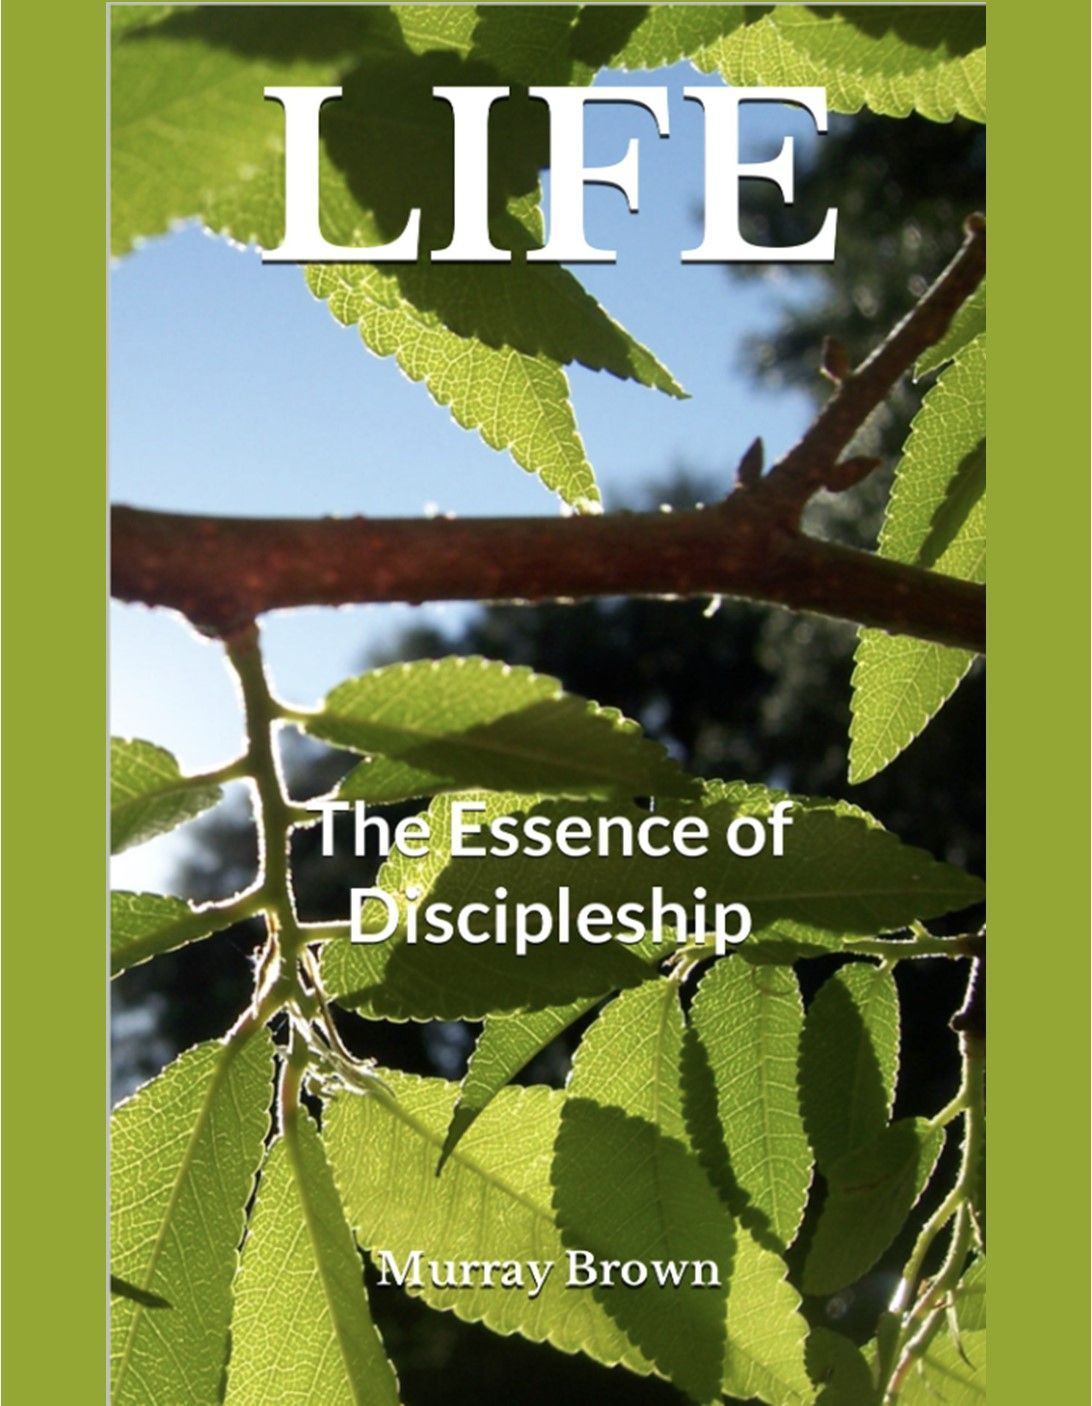 LIFE: The Essence of Discipleship